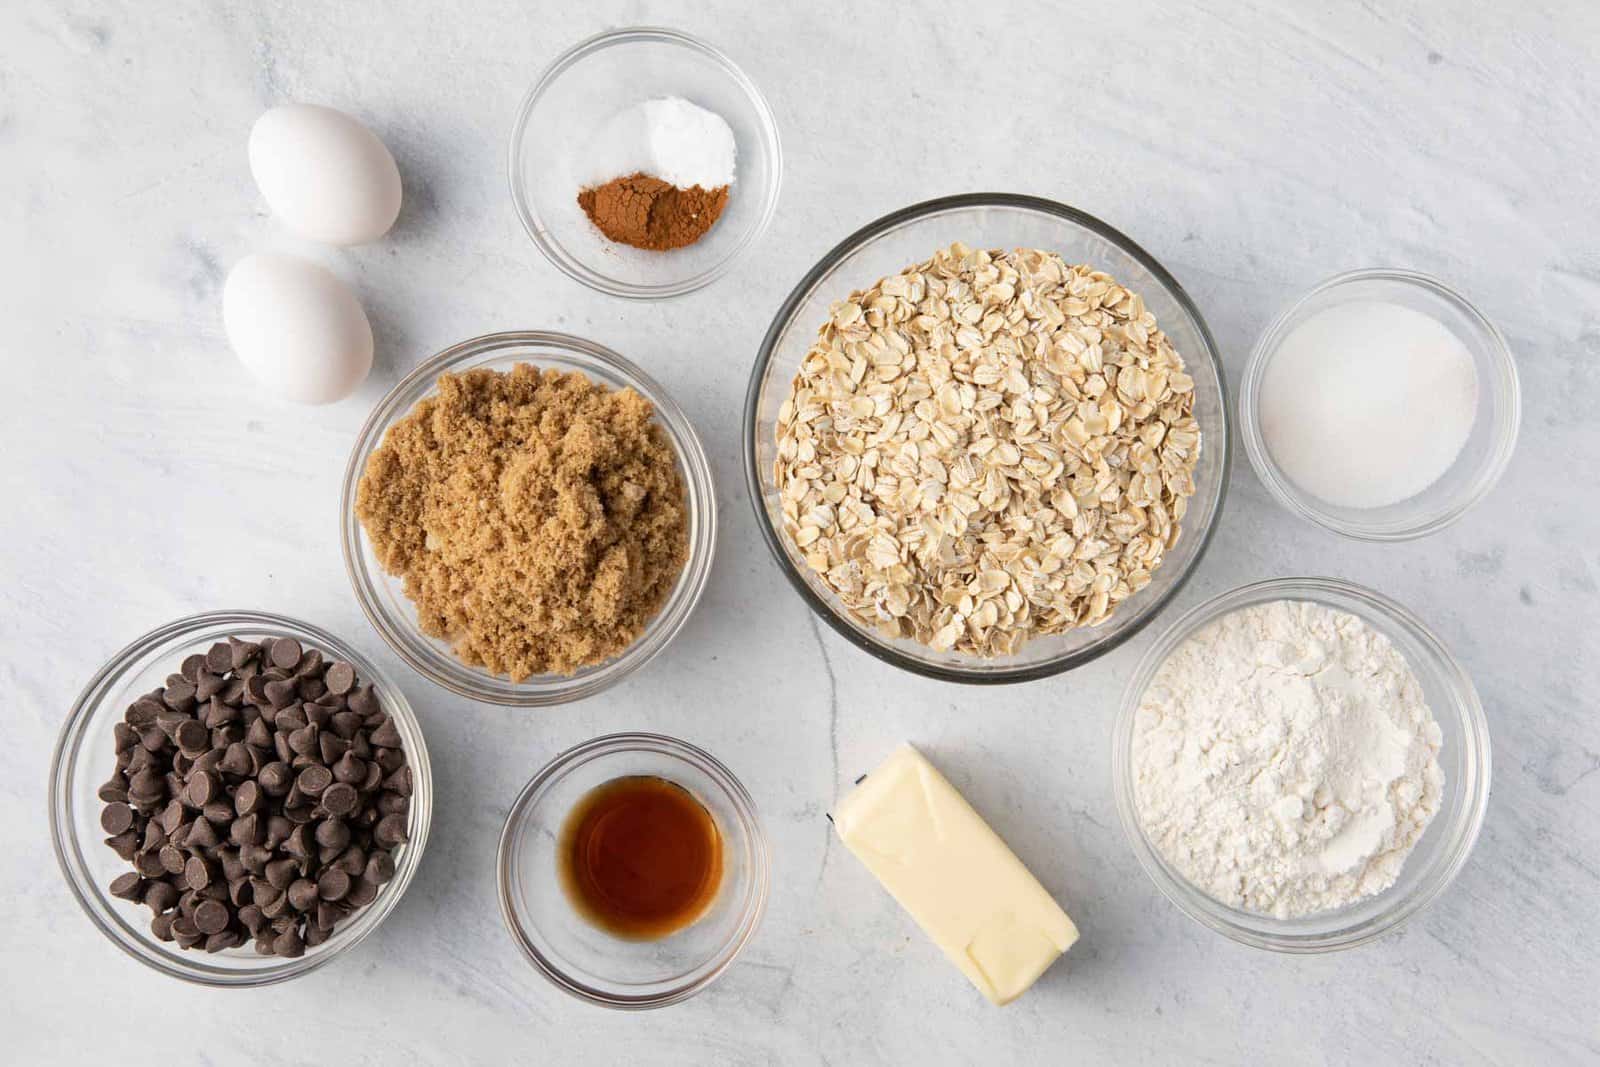 Ingredients for recipe in individual bowls: butter, sugar, oatmeal, chocolate chips, spices, vanilla, flour, 2 eggs, and brown sugar.